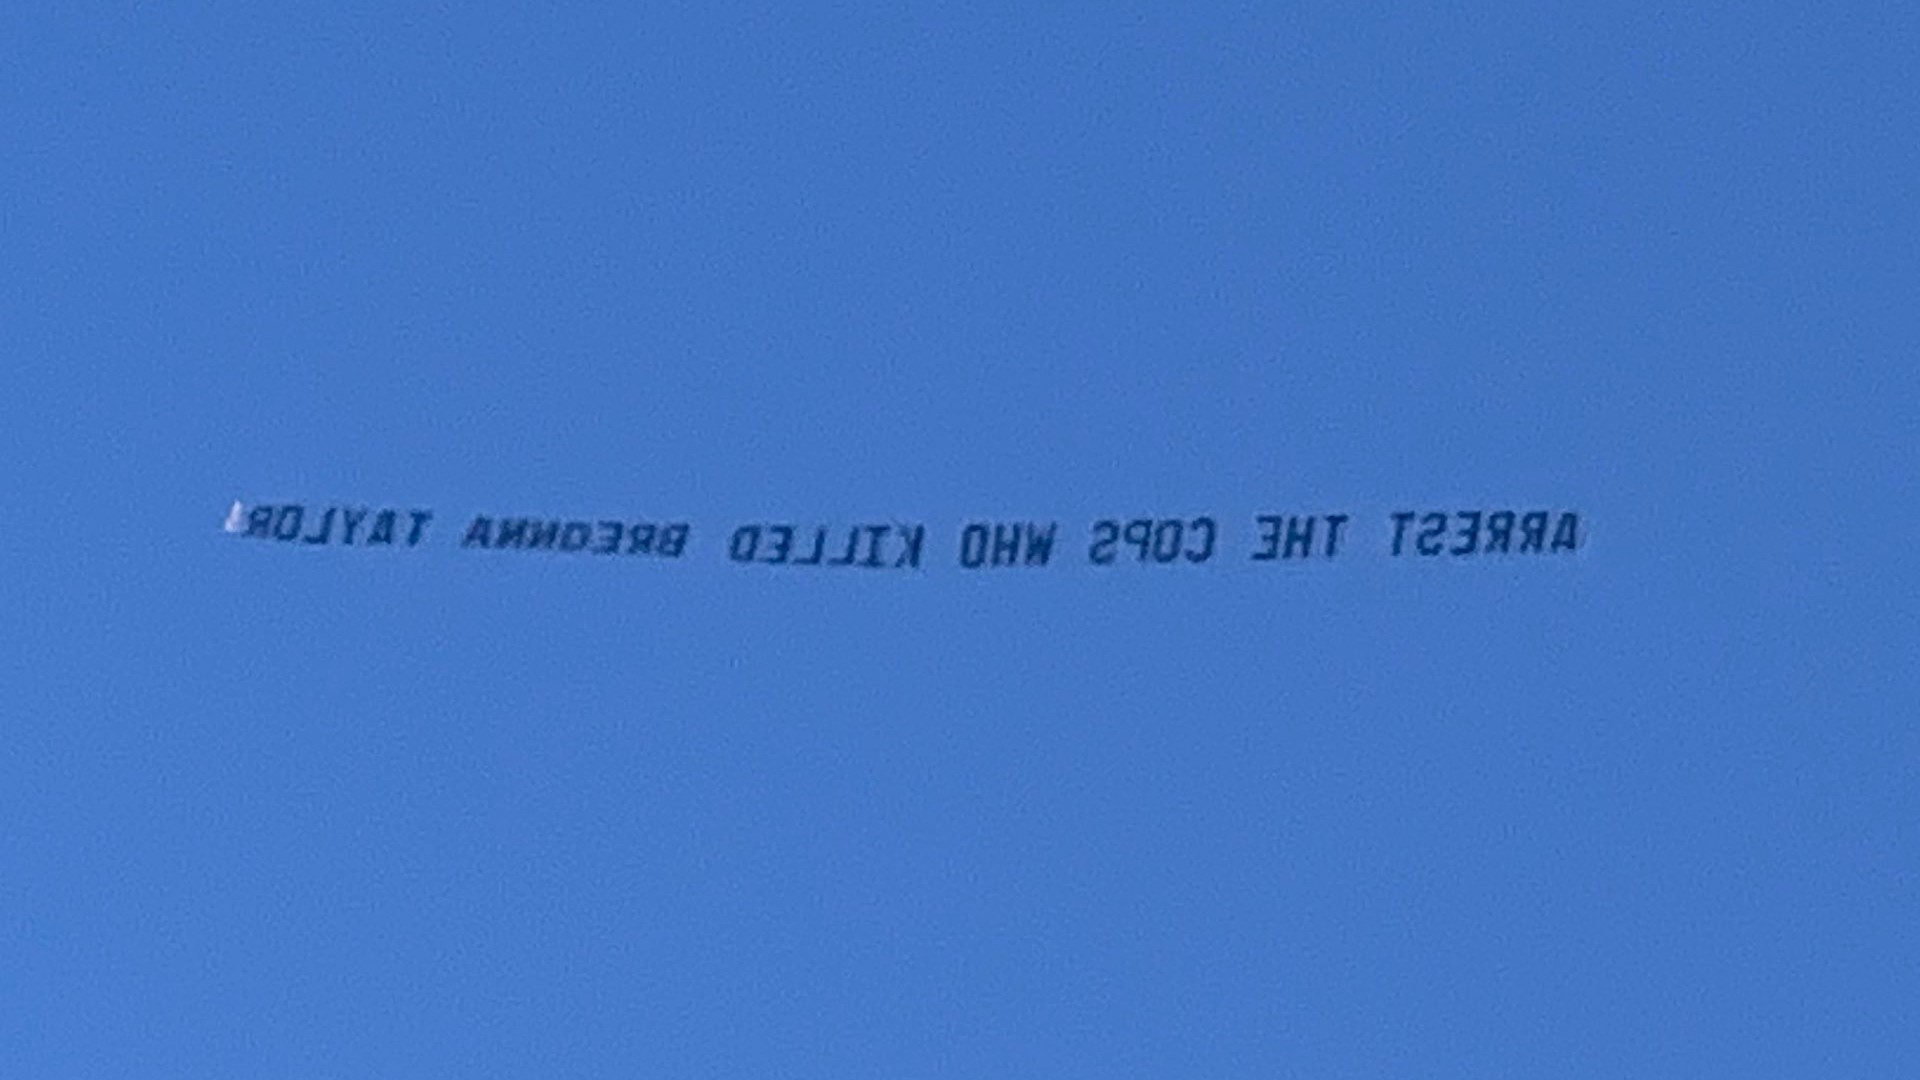 A banner saying "Arrest the cops that killed Breonna Taylor flew over Churchill Downs ahead of the Kentucky Derby race.